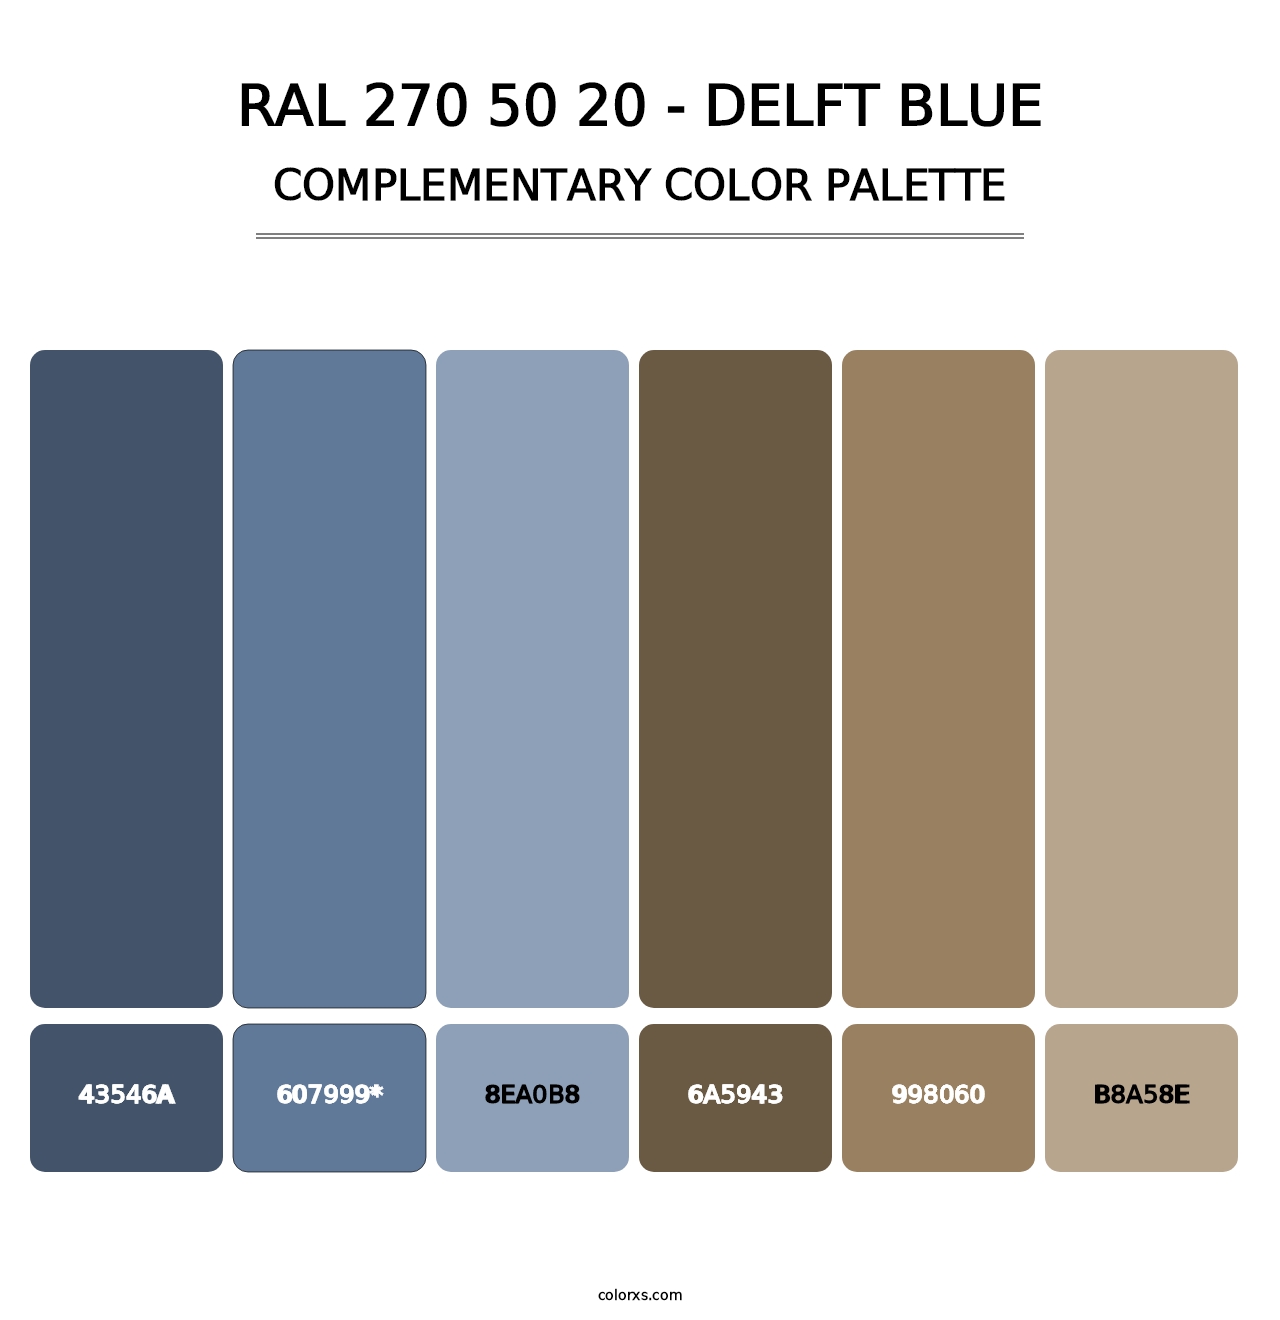 RAL 270 50 20 - Delft Blue - Complementary Color Palette